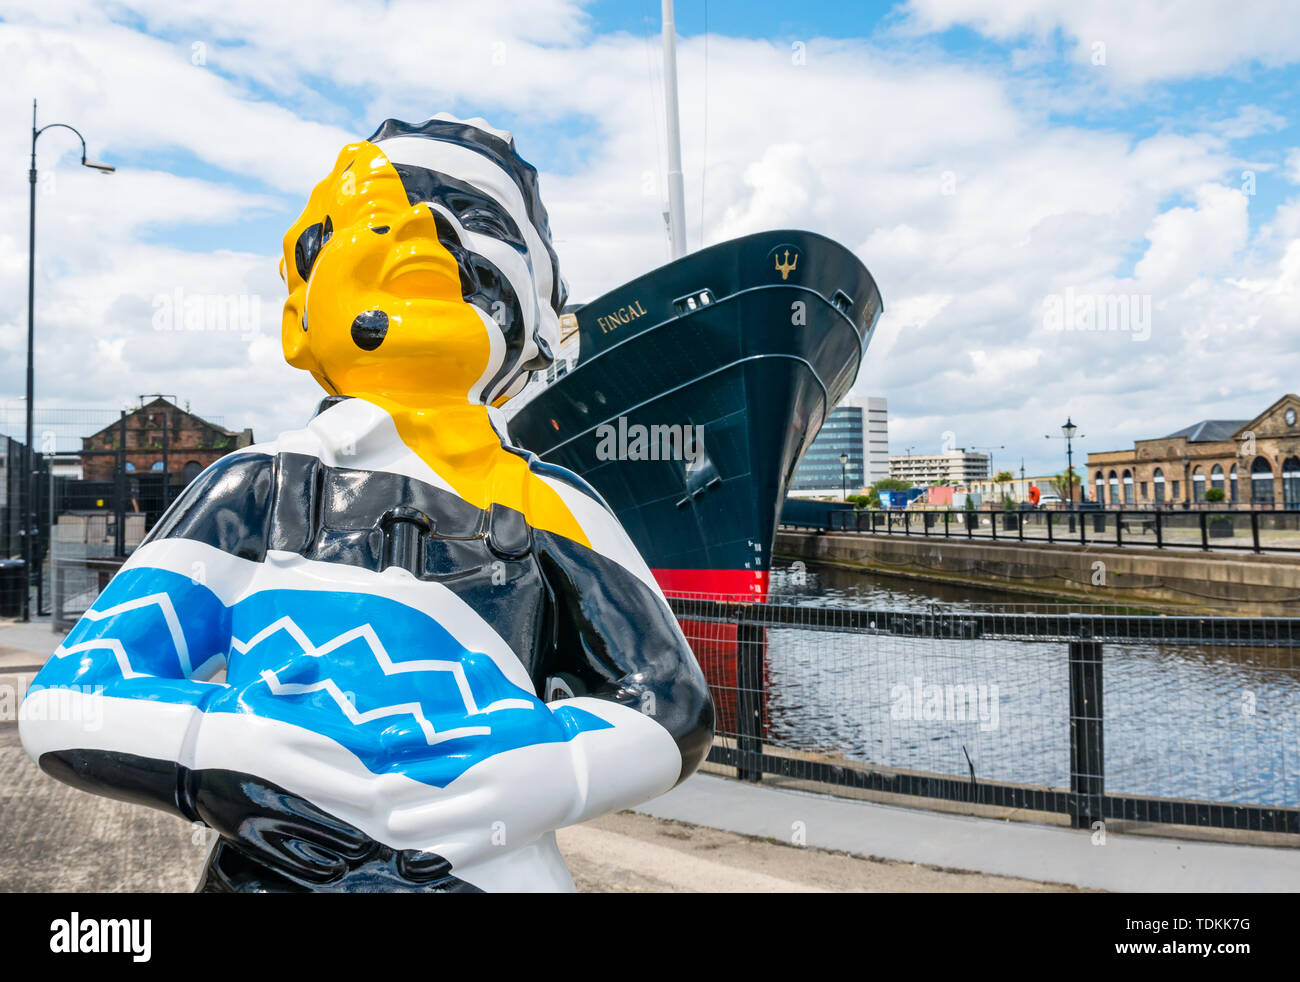 Leith, Edinburgh, Scotland, United Kingdom, 17 June 2019. Oor Wullie's Big Bucket Trail: An art trail of 200 Oor Wullie sculptures appear in Scottish cities in a mass arts event that lasts until August 30th. Oor Wullie is an iconic Scottish cartoon character from the Sunday Post newspaper. The sculptures will be auctioned to raise money for Scotland’s children’s charities There are 5 in the Leith area, and 60 in Edinburgh altogether. Bobby Dazzler by Scott Dawson and Rachel Miller in Alexandra Dock next to Fingal Edinburgh luxury floating hotel Stock Photo